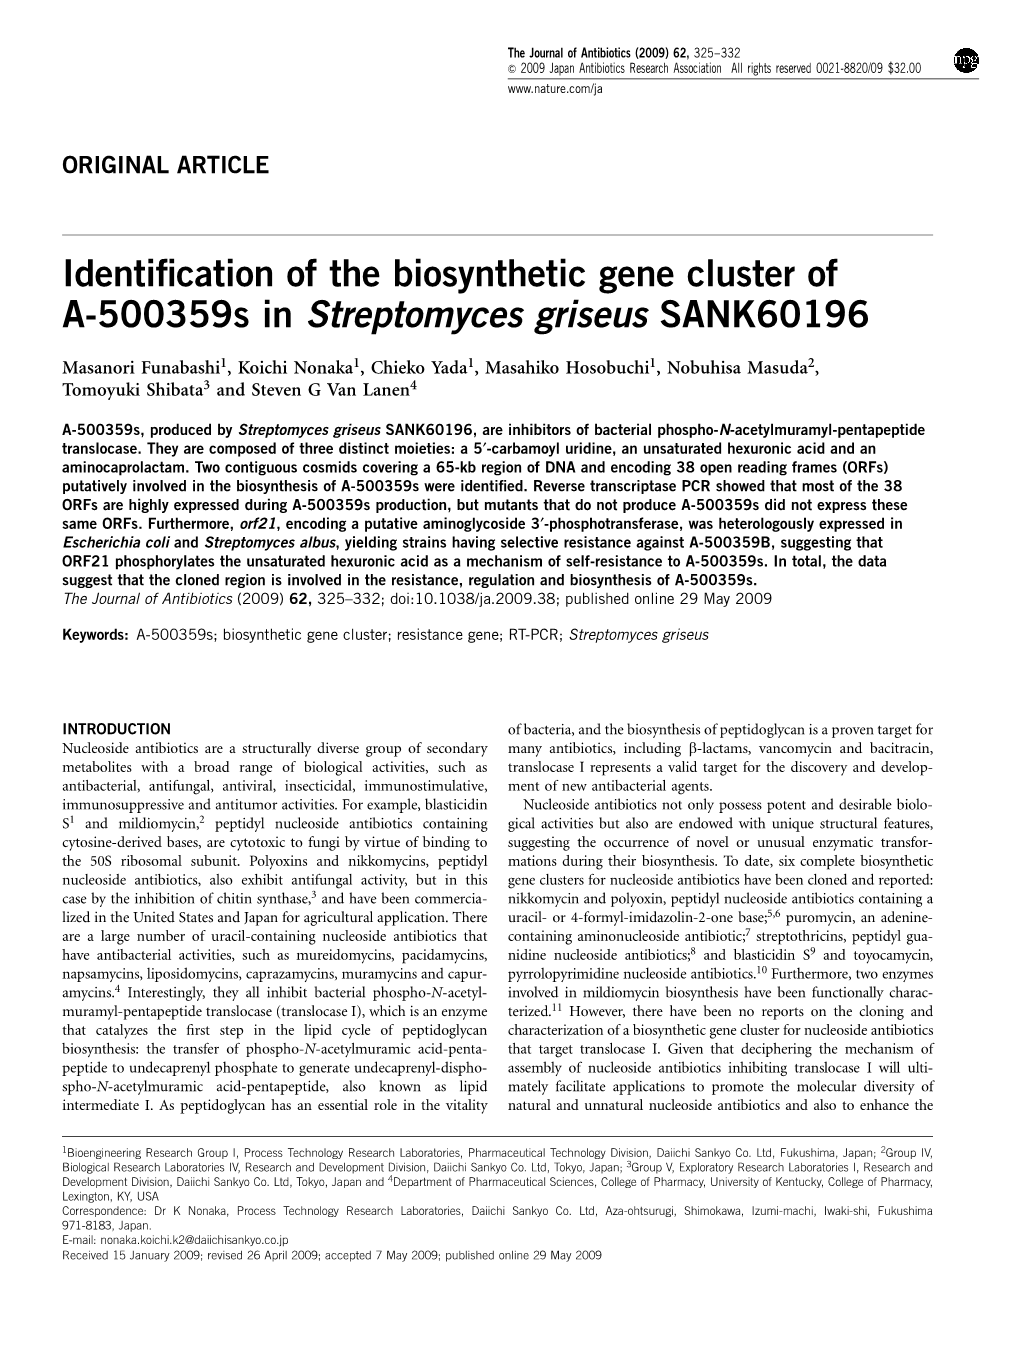 Identification of the Biosynthetic Gene Cluster of A-500359S In